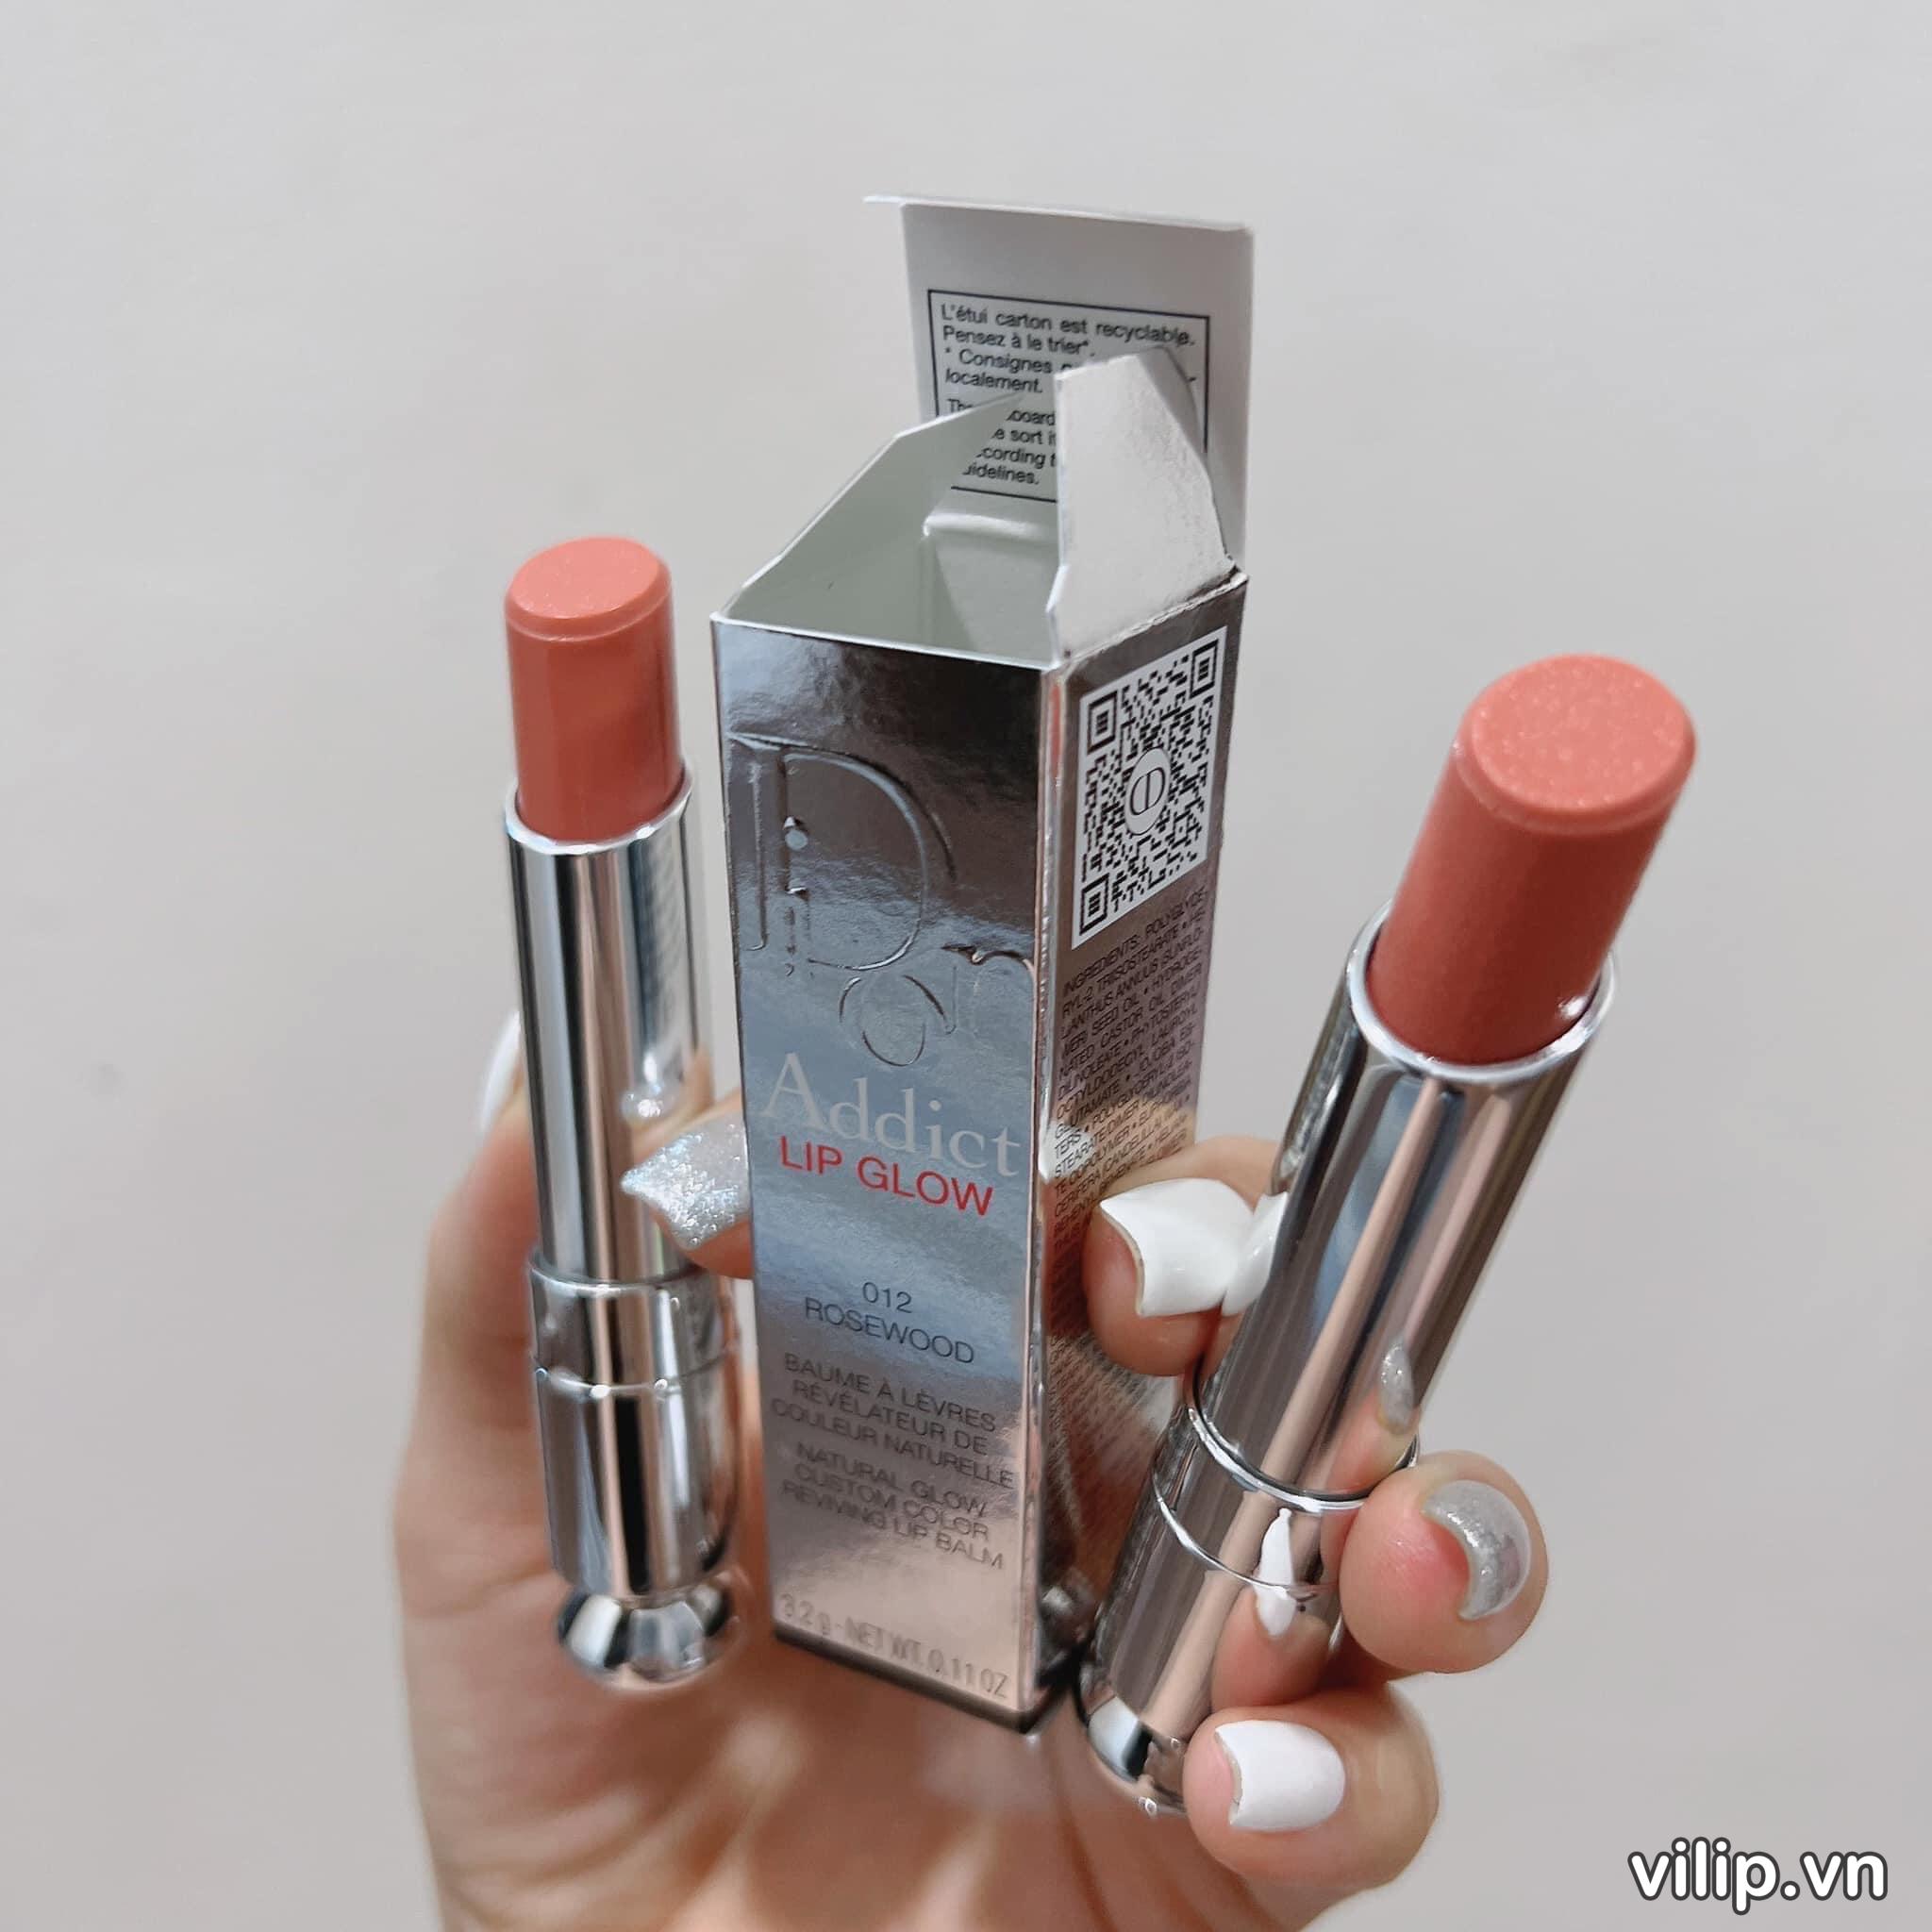 Makeuptalkph  Lip balms were never this good until now  Dior Addict  Lip Glow Shade 001 pink 1950php only An iconic Dior lip balm with 97  percent naturalorigin ingredients that awakens